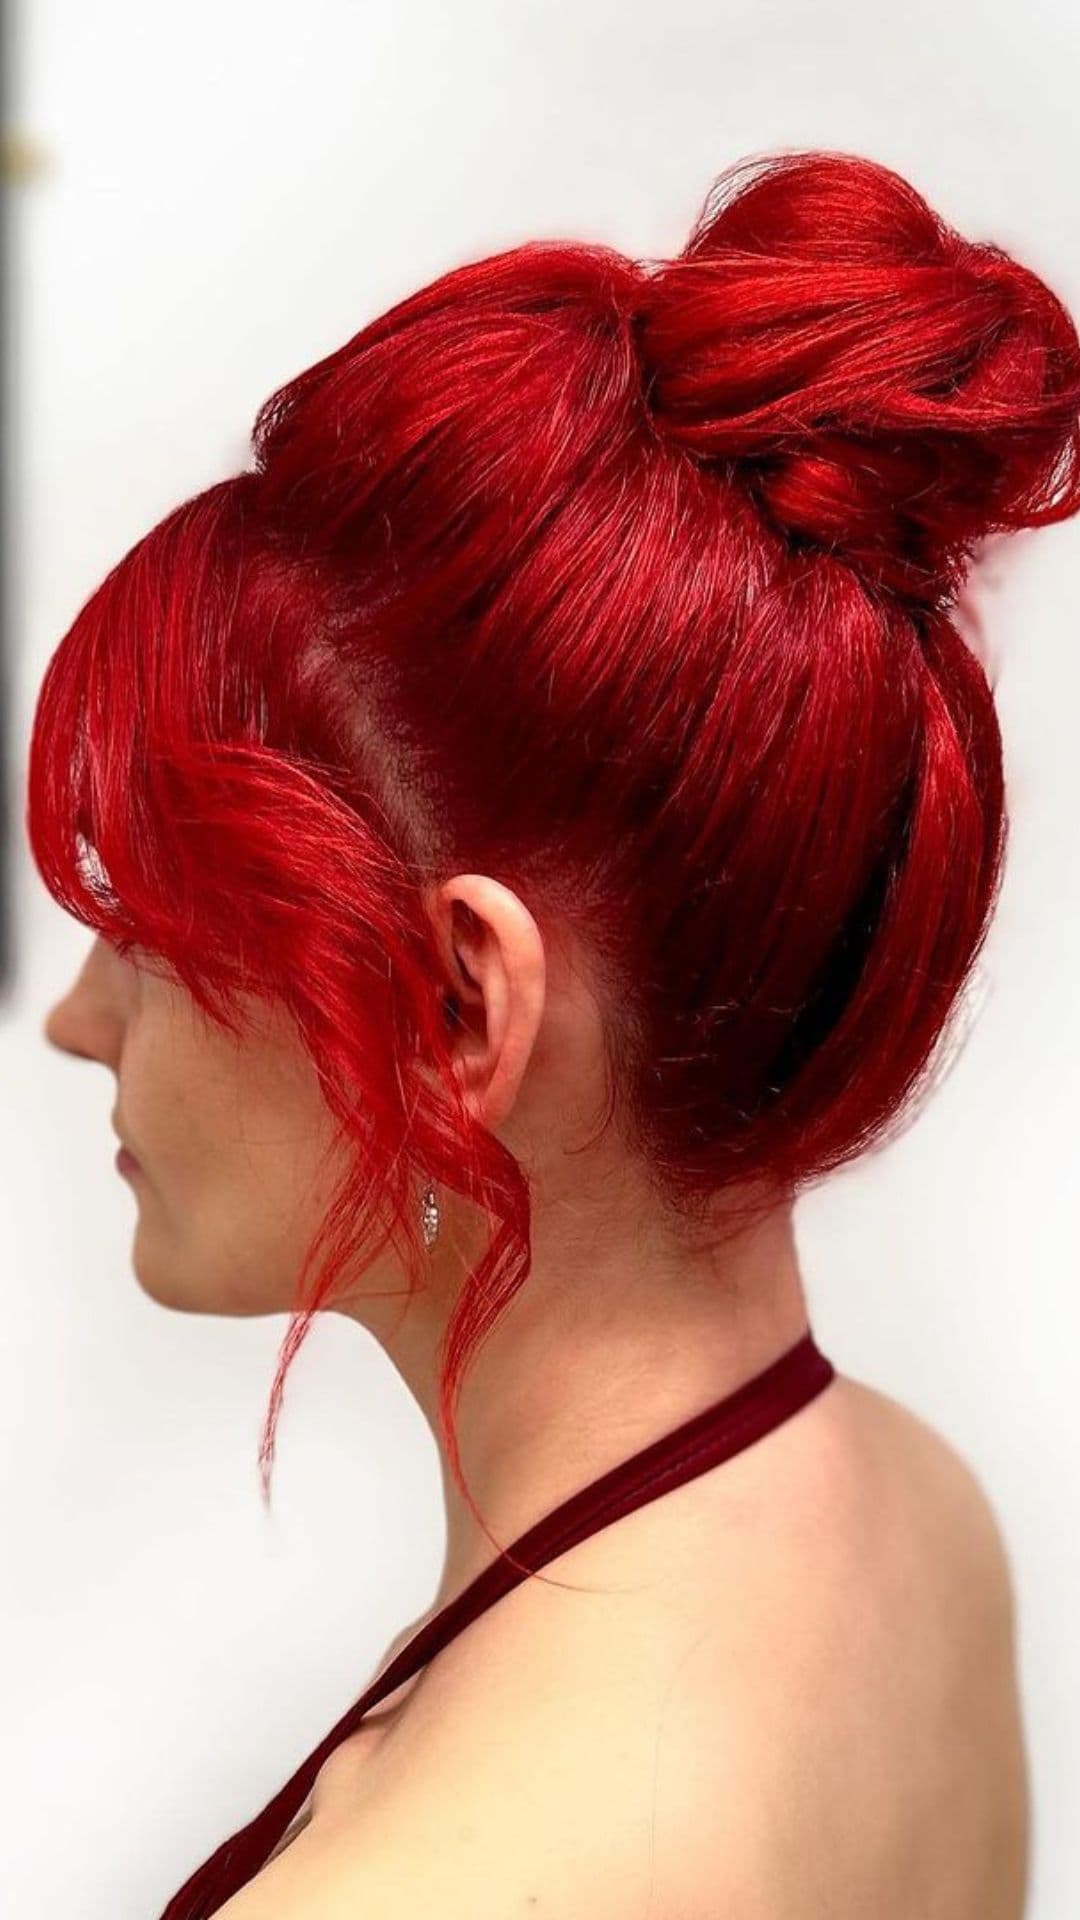 A woman with a red hair updo.